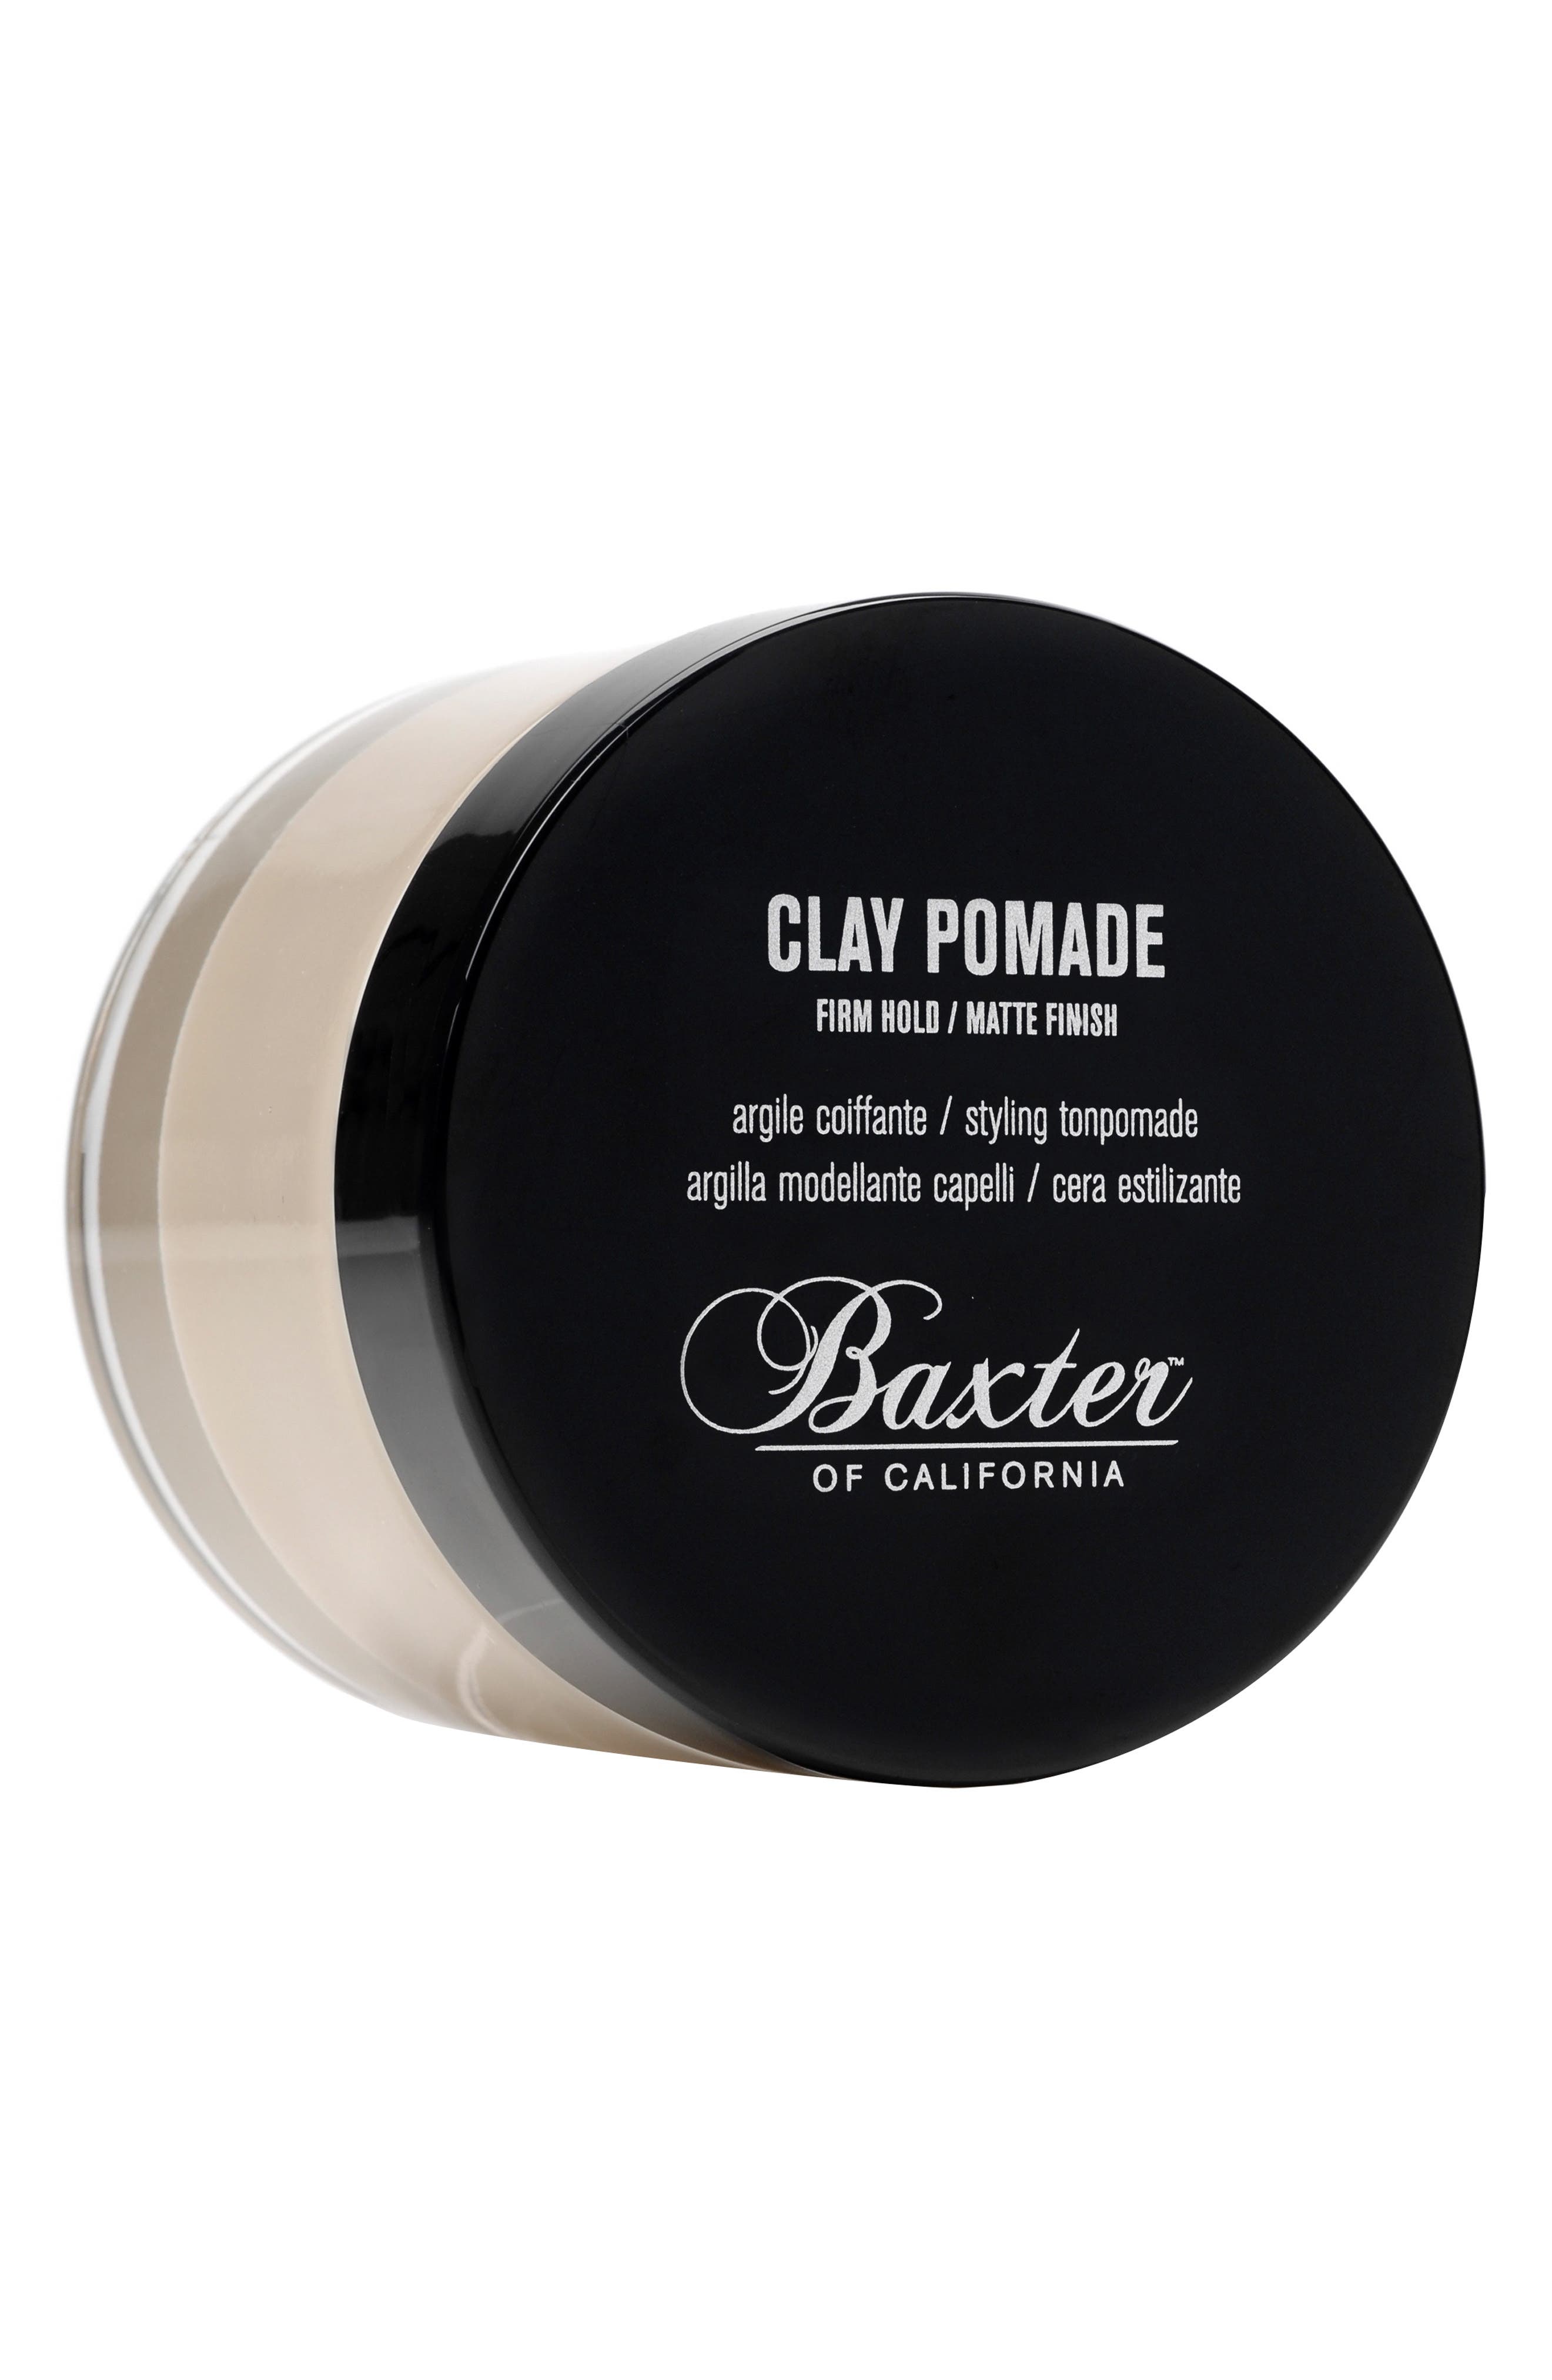 BAXTER OF CALIFORNIA CLAY POMADE,838364004019